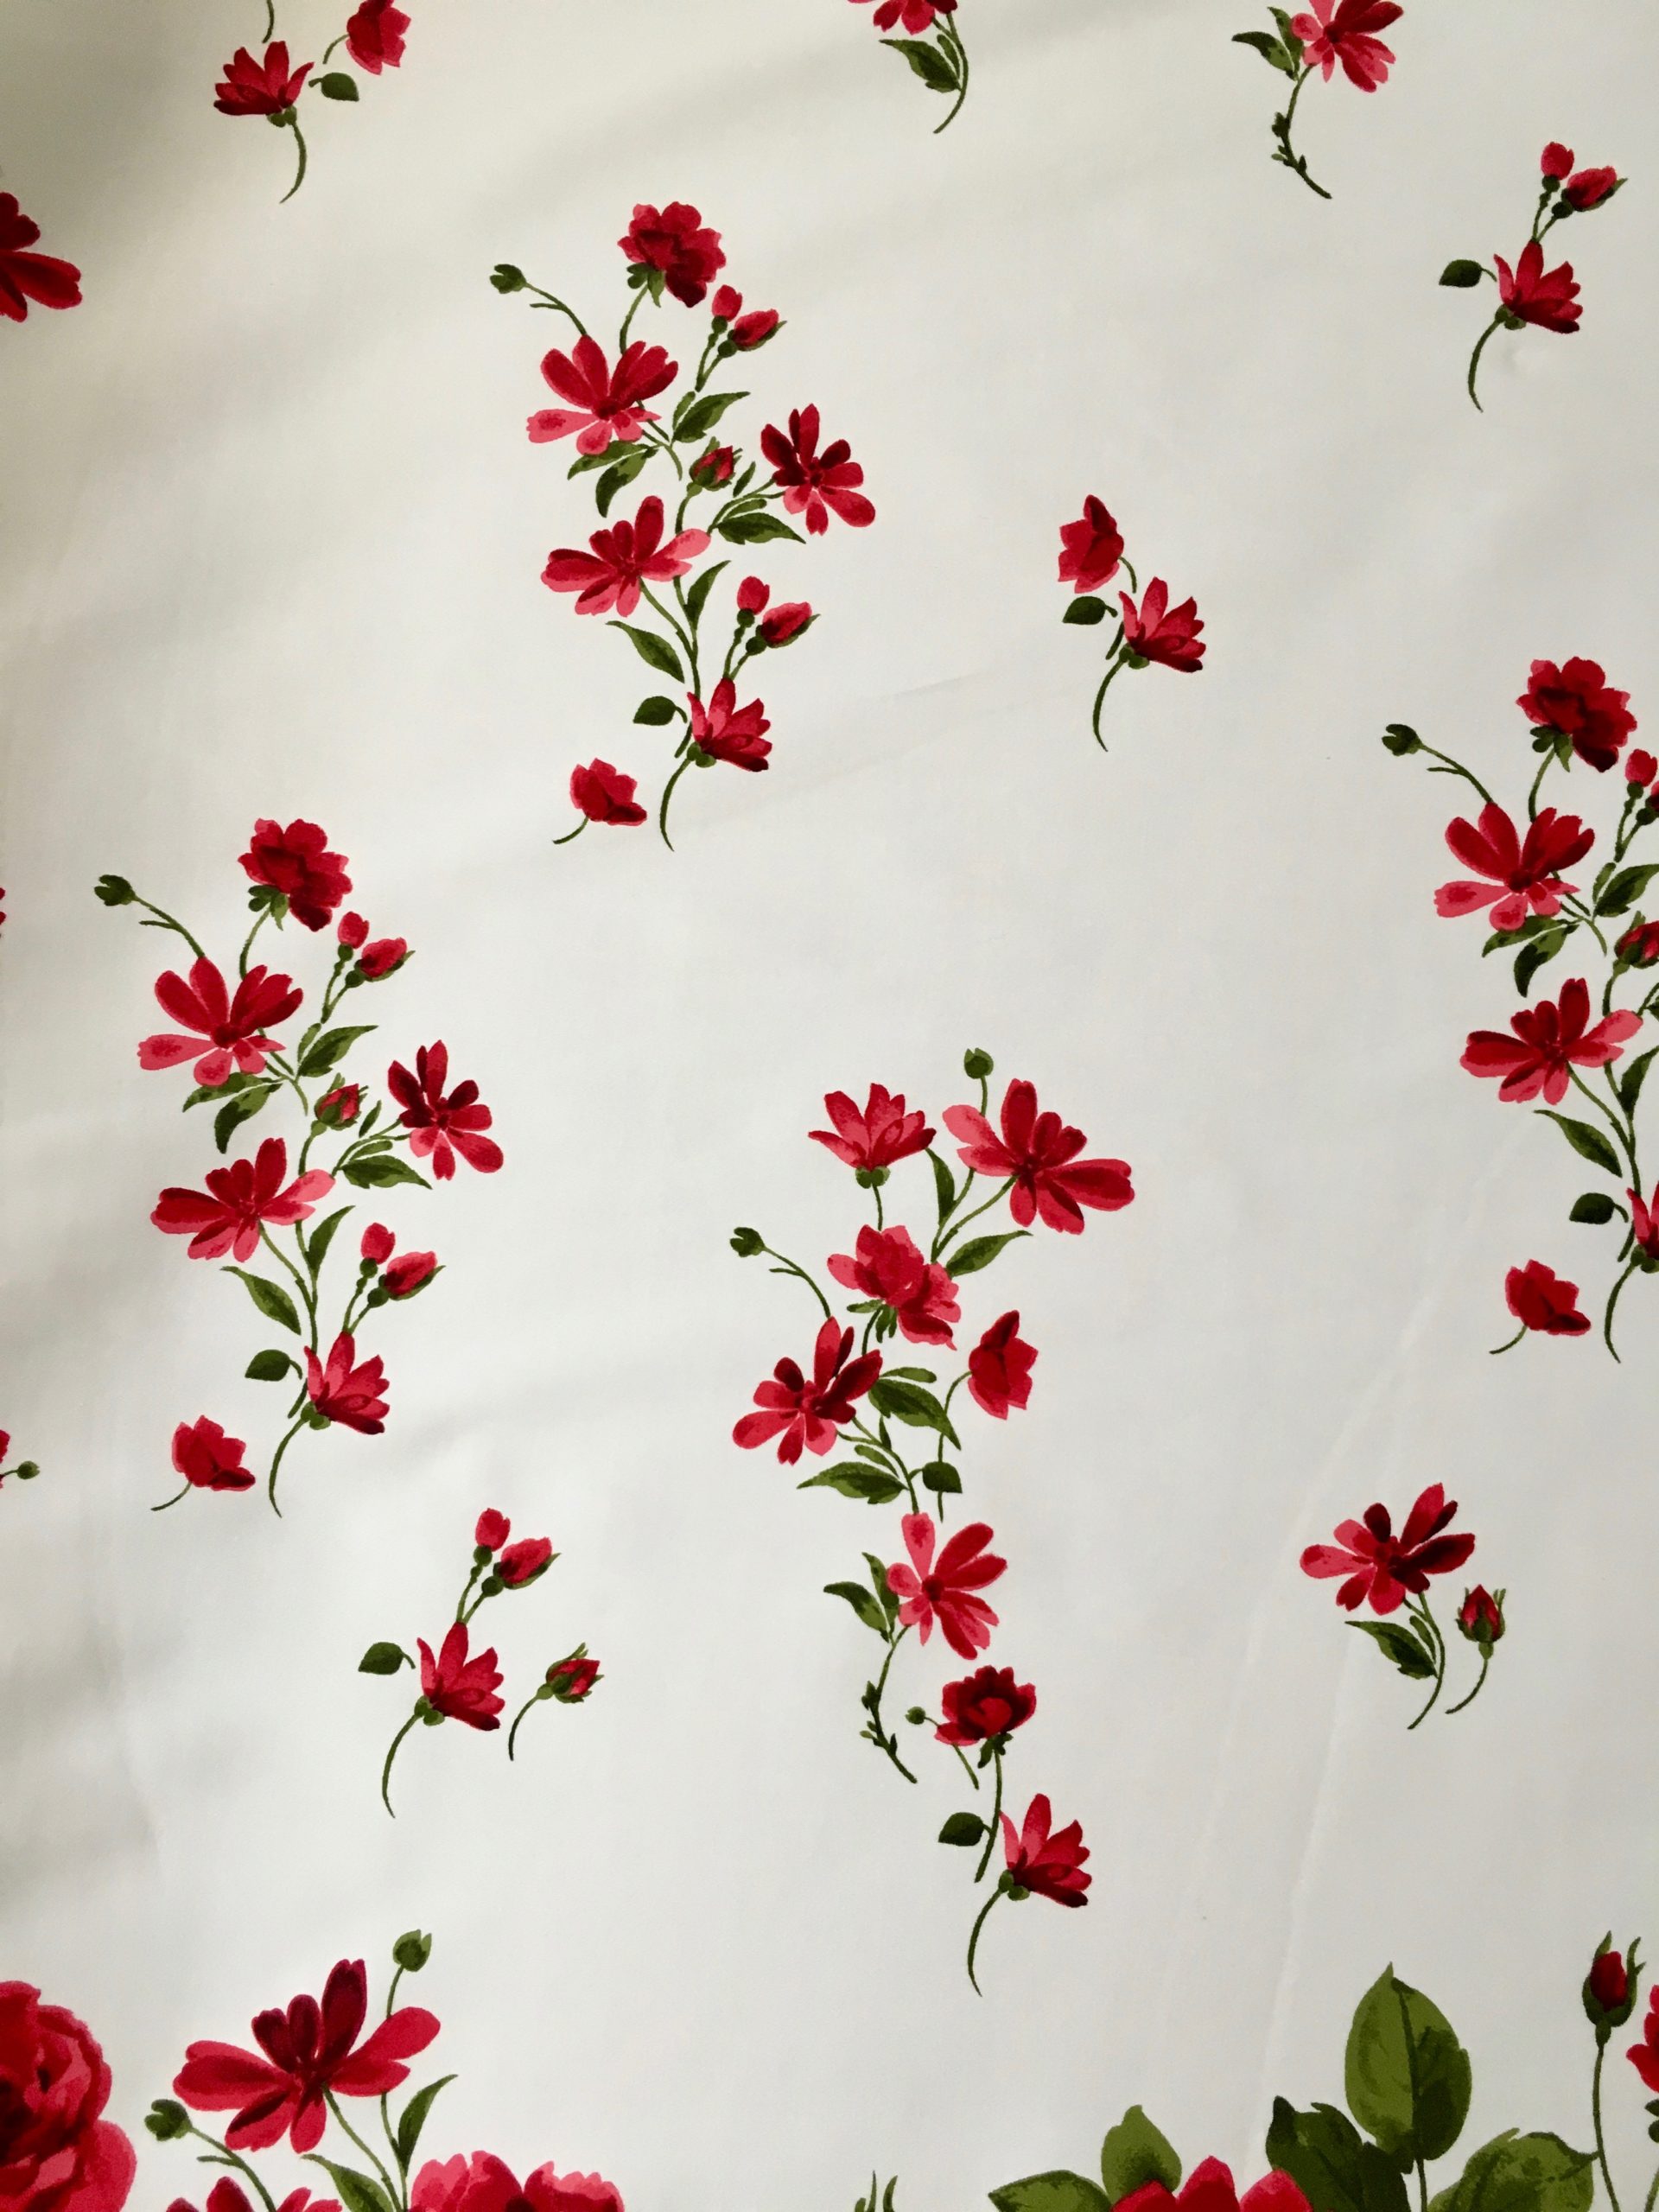 Embroidered Sheer Floral Flowers Hearts Border Off White Fabric by the Yard  (4105G-8J)